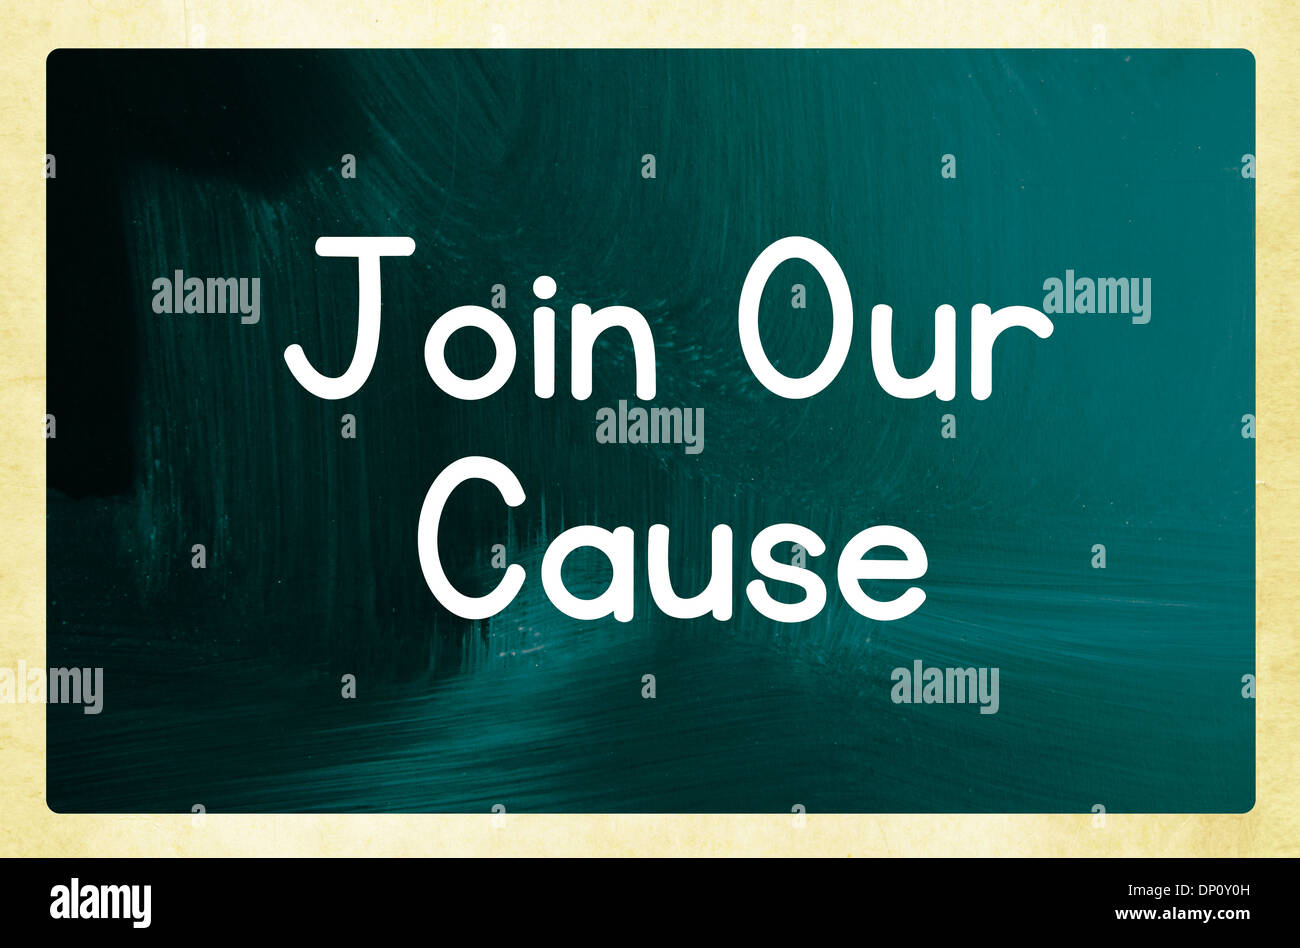 join our cause concept Stock Photo